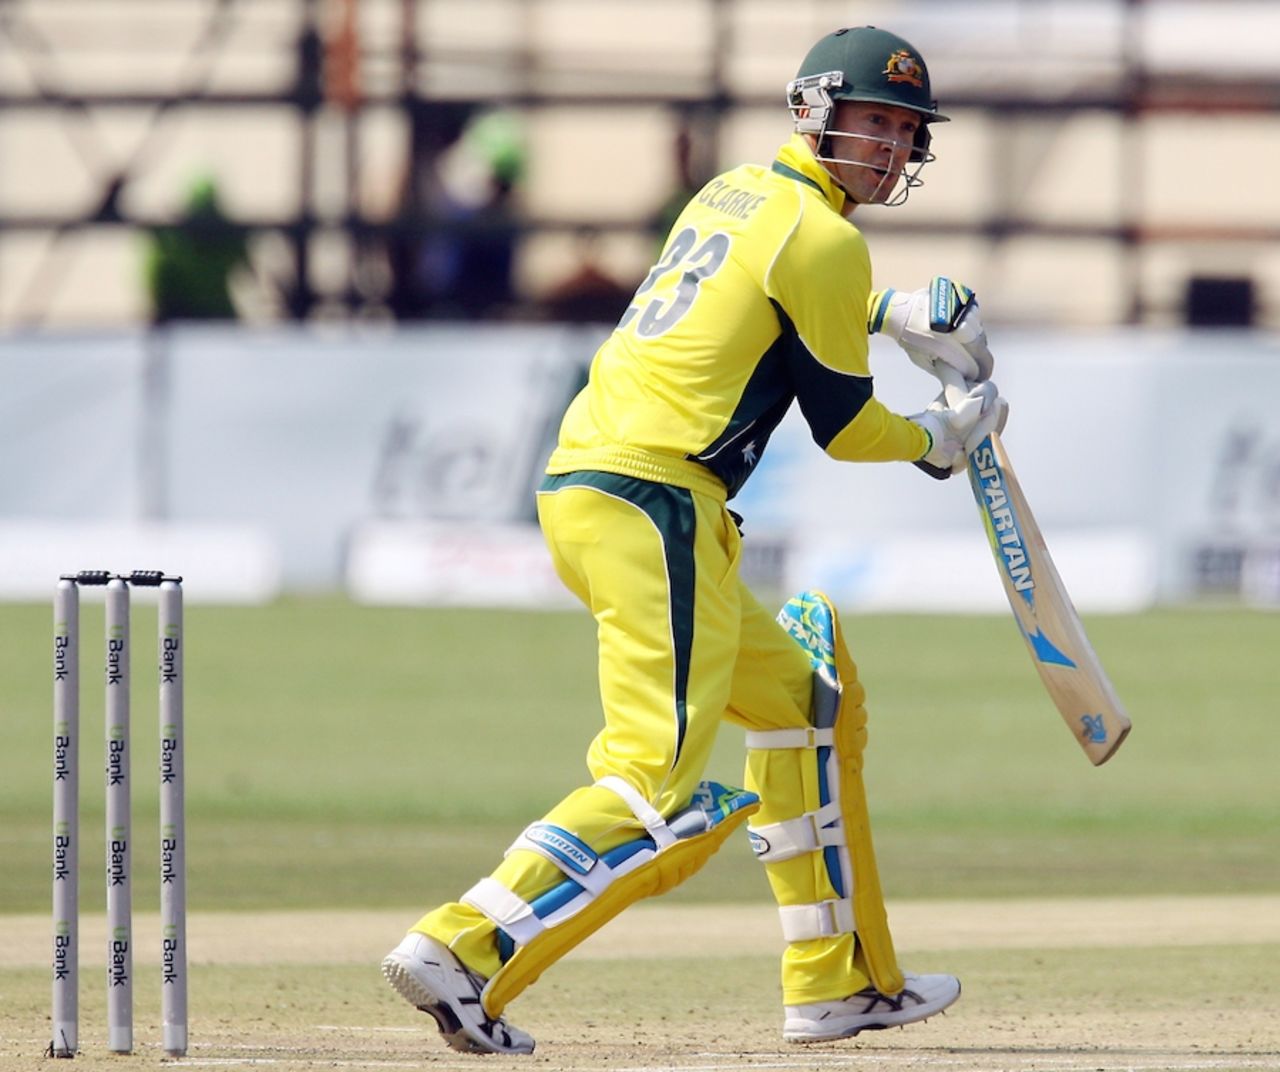 Michael Clarke returned to the ODI side with a fifty, Zimbabwe v Australia, tri-series, Harare, August 31, 2014